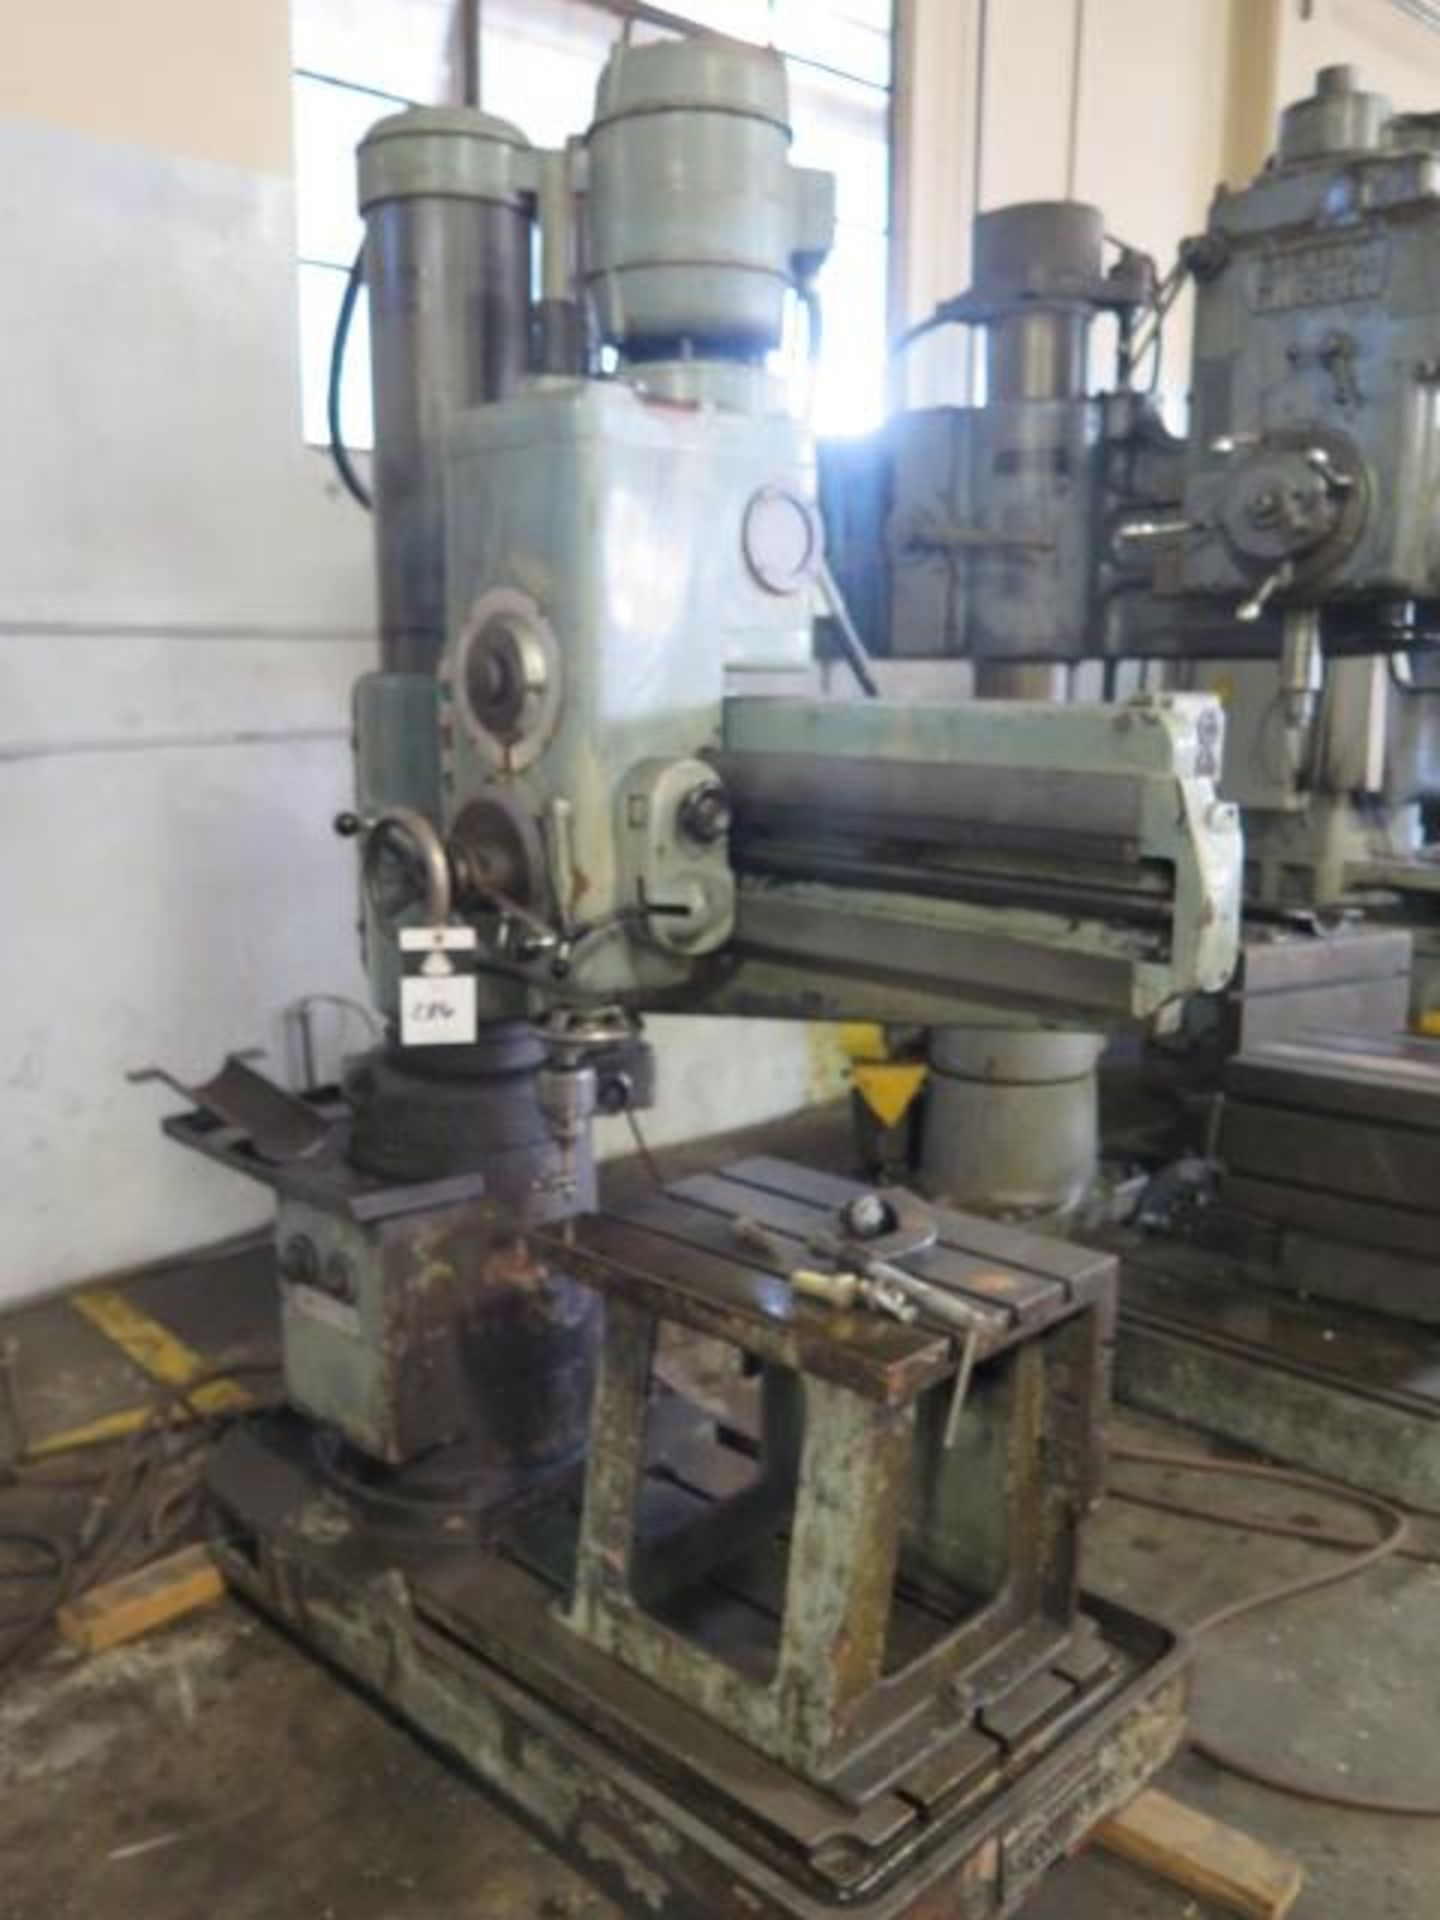 Speedmaster 9” Column x 24” Radial Arm Drill w/ 61-2100 RPM, Power Column and Feeds, SOLD AS IS